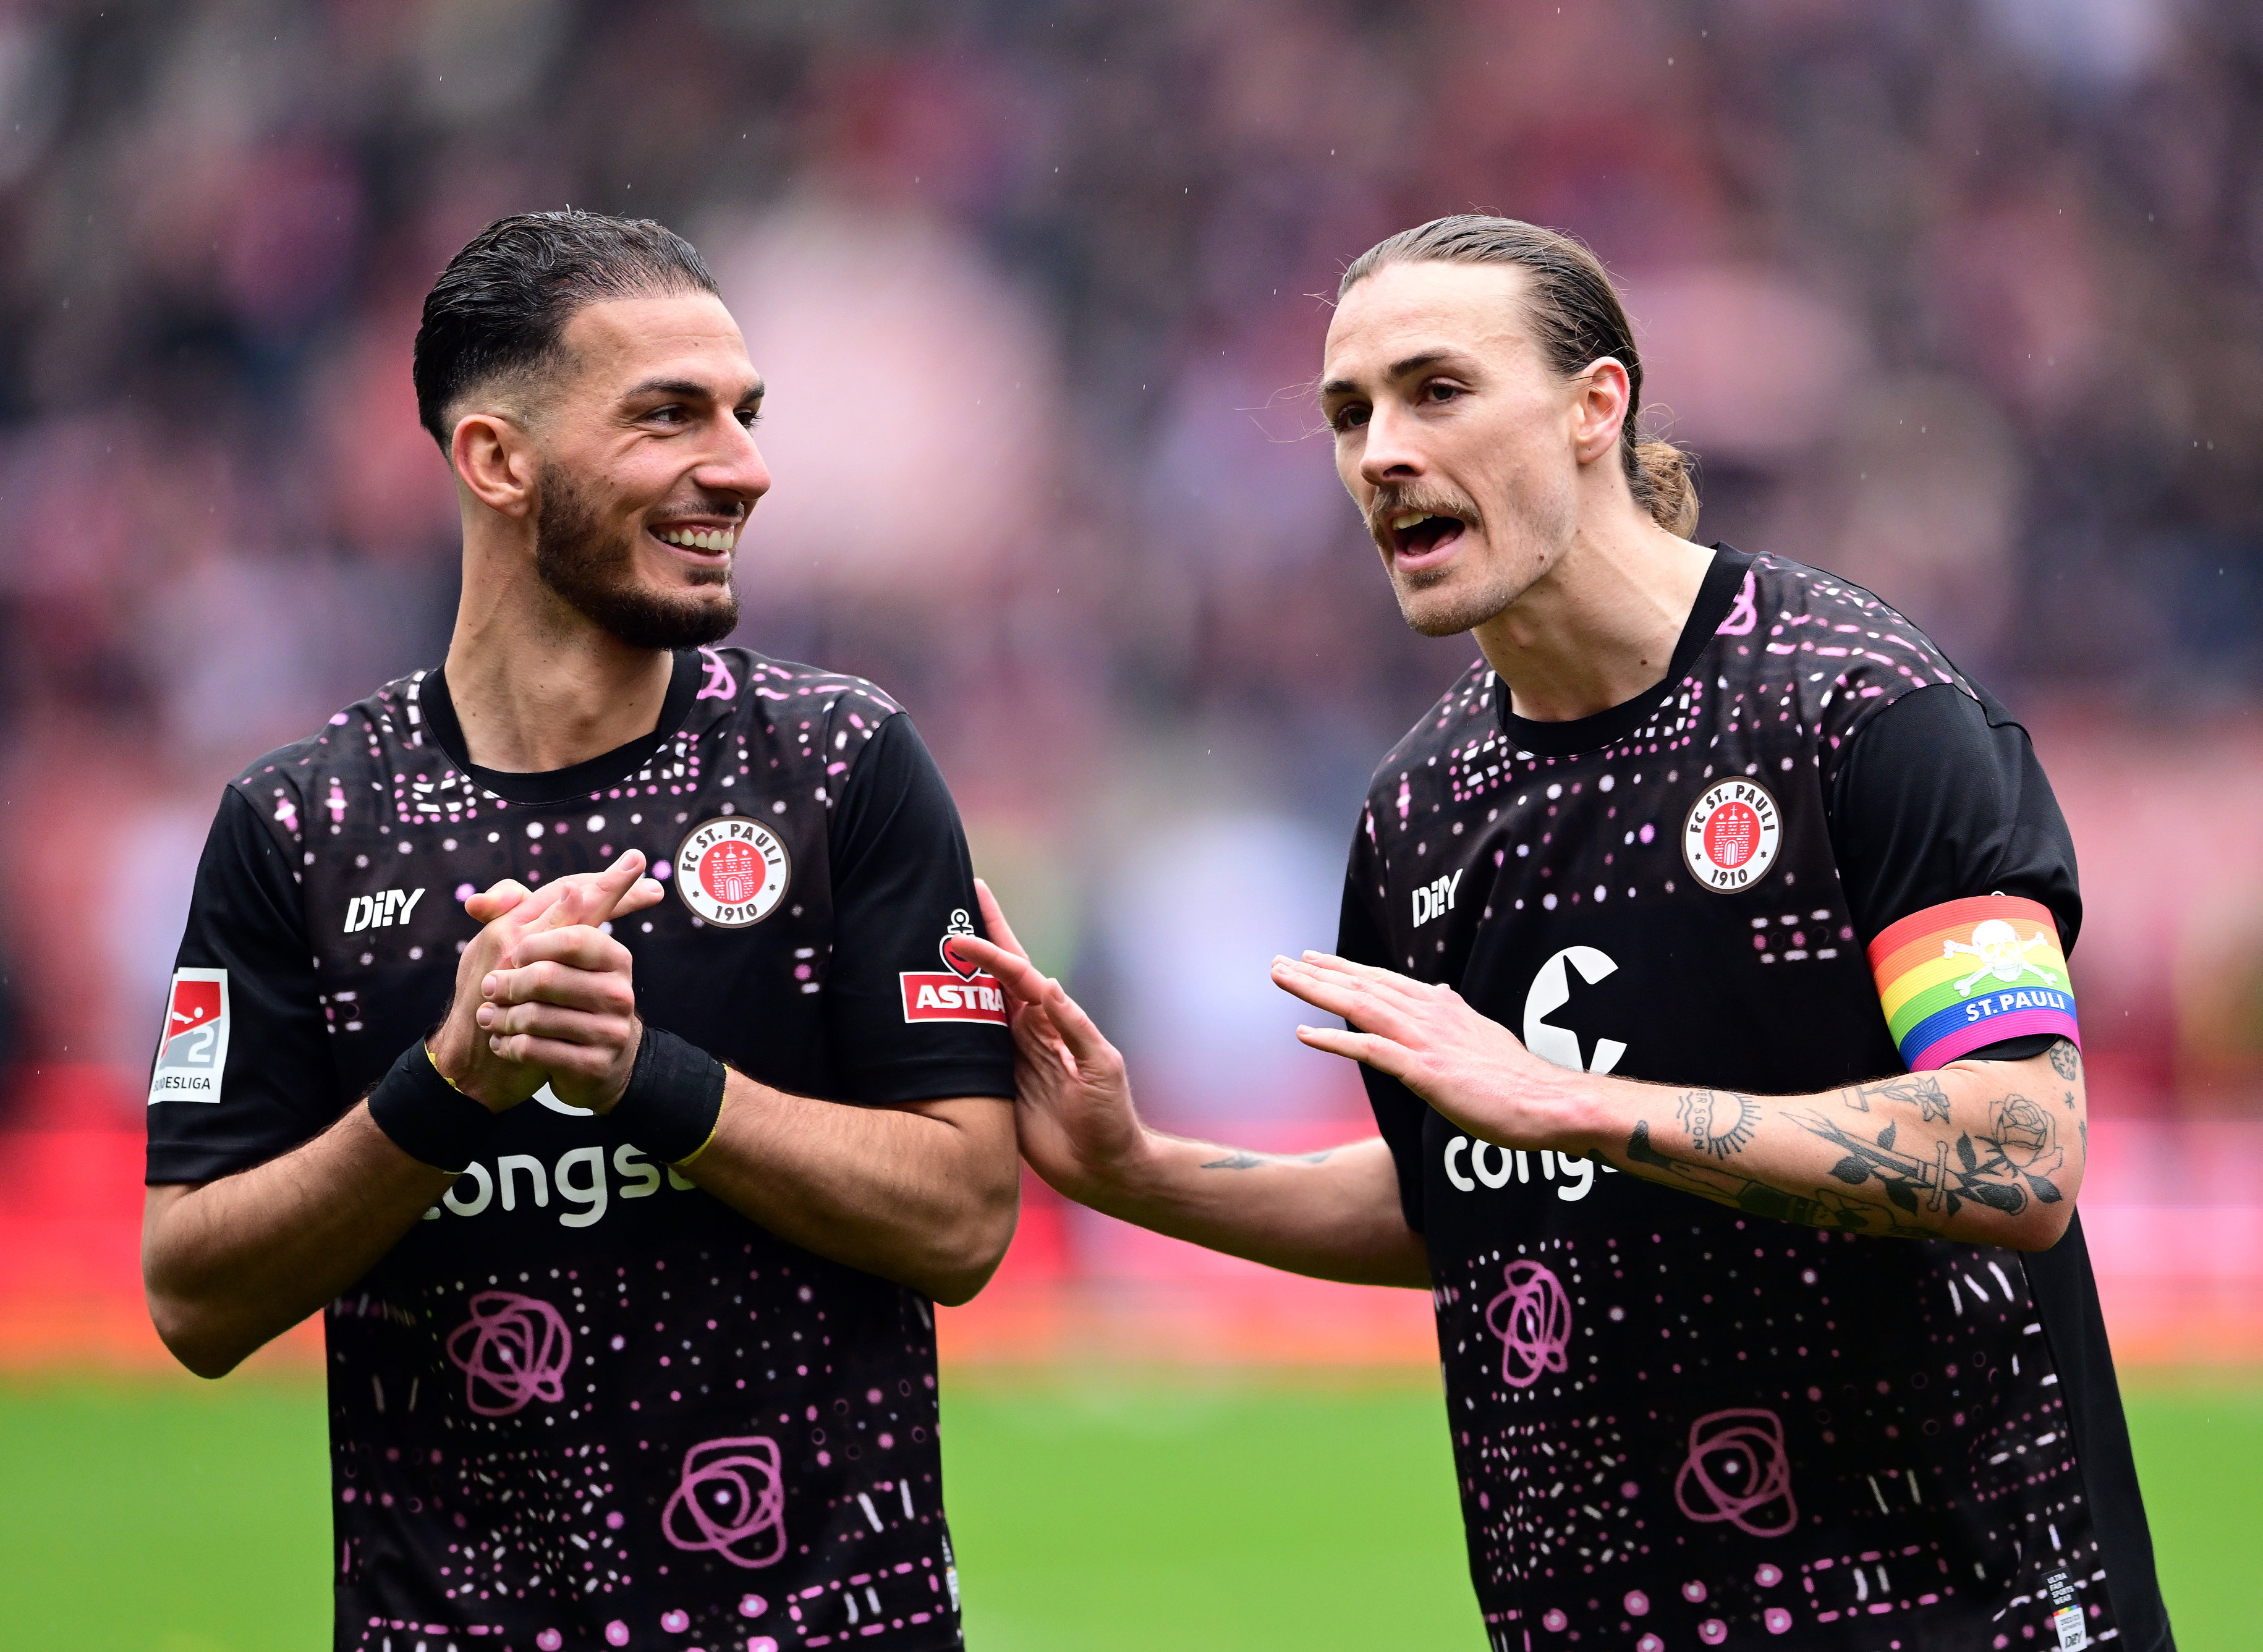 Against Regensburg and Heidenheim, Jackson Irvine led the team out as captain. For the derby, Leart Paqarada will wear the captain’s armband.